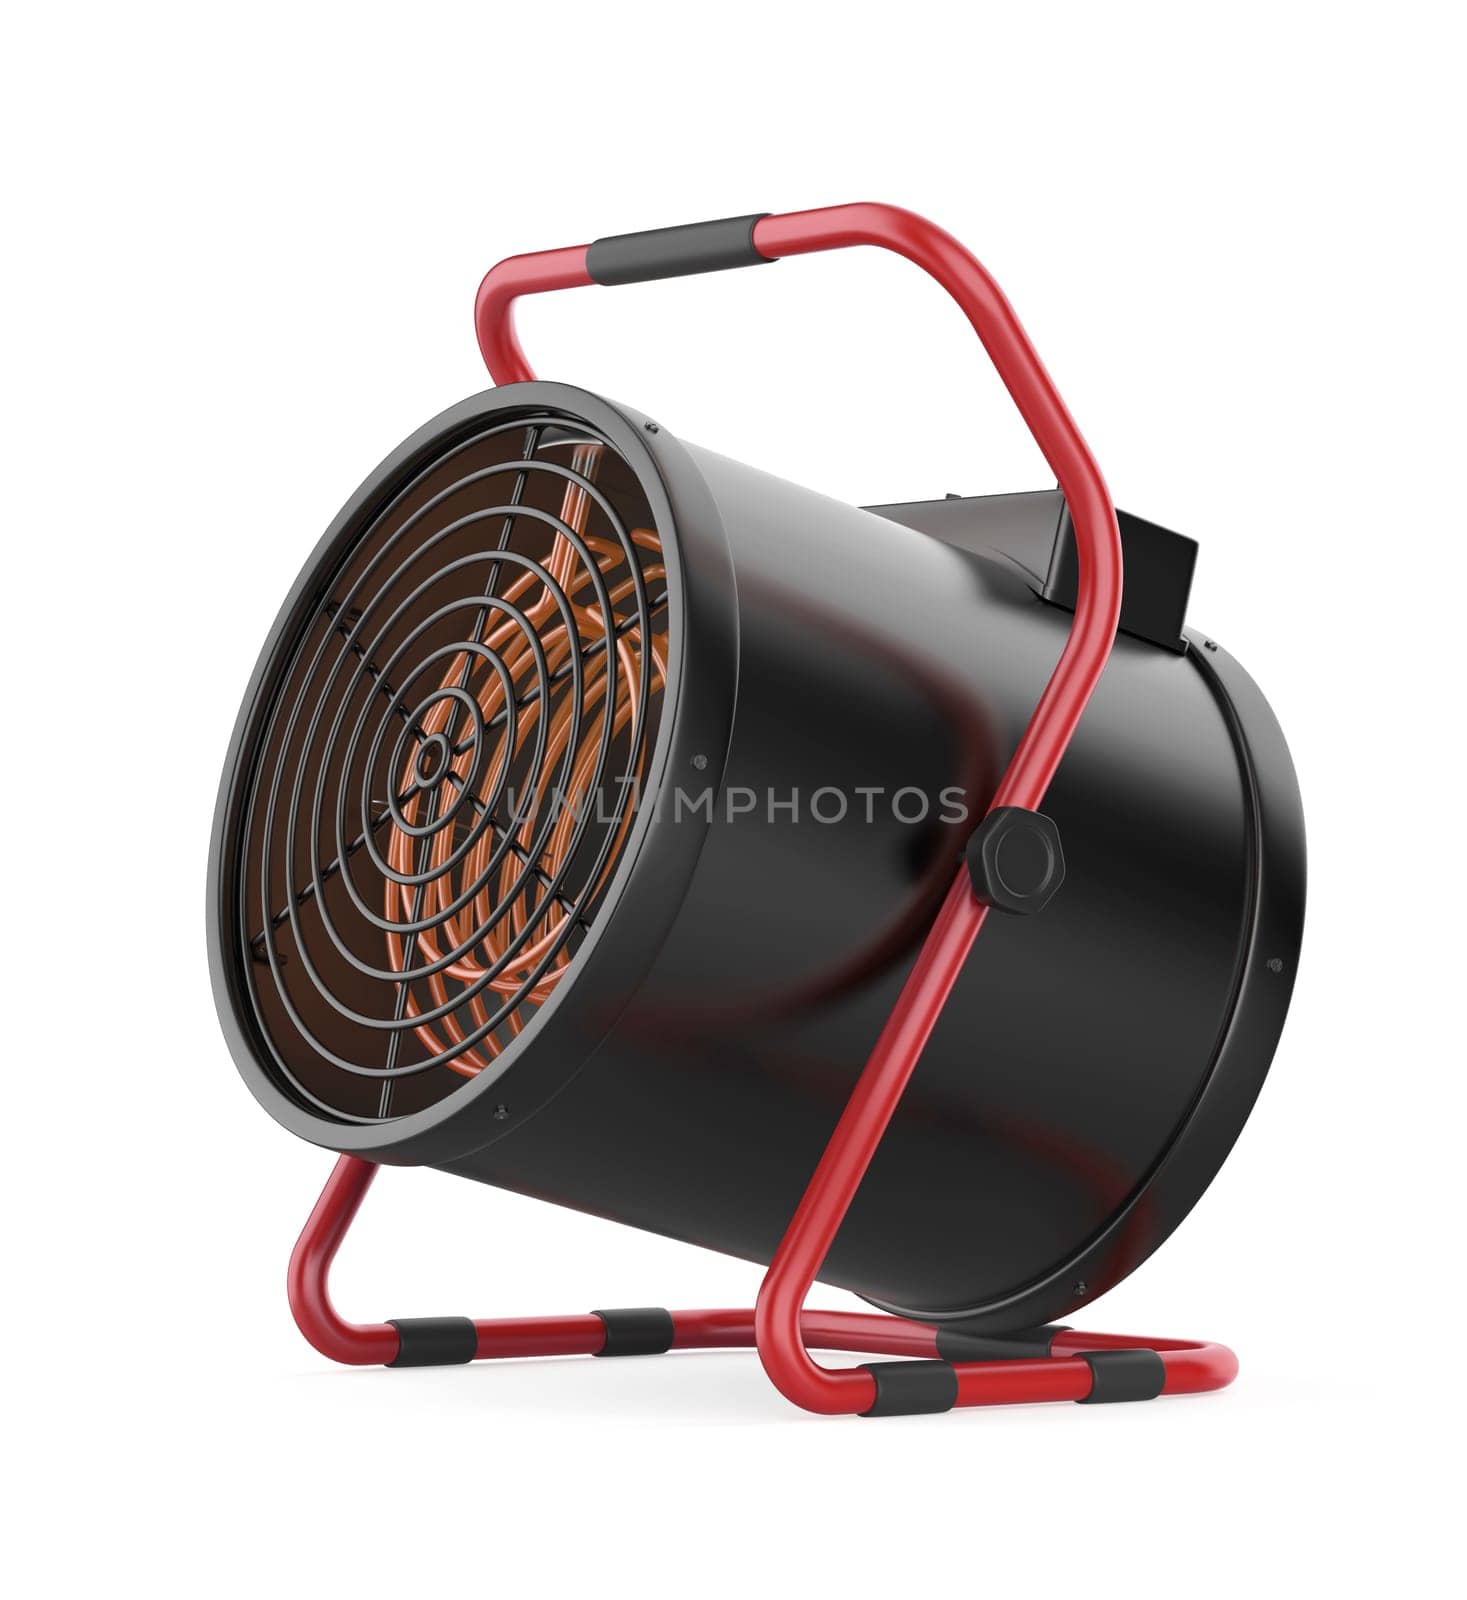 Cylinder shaped electric fan heater by magraphics